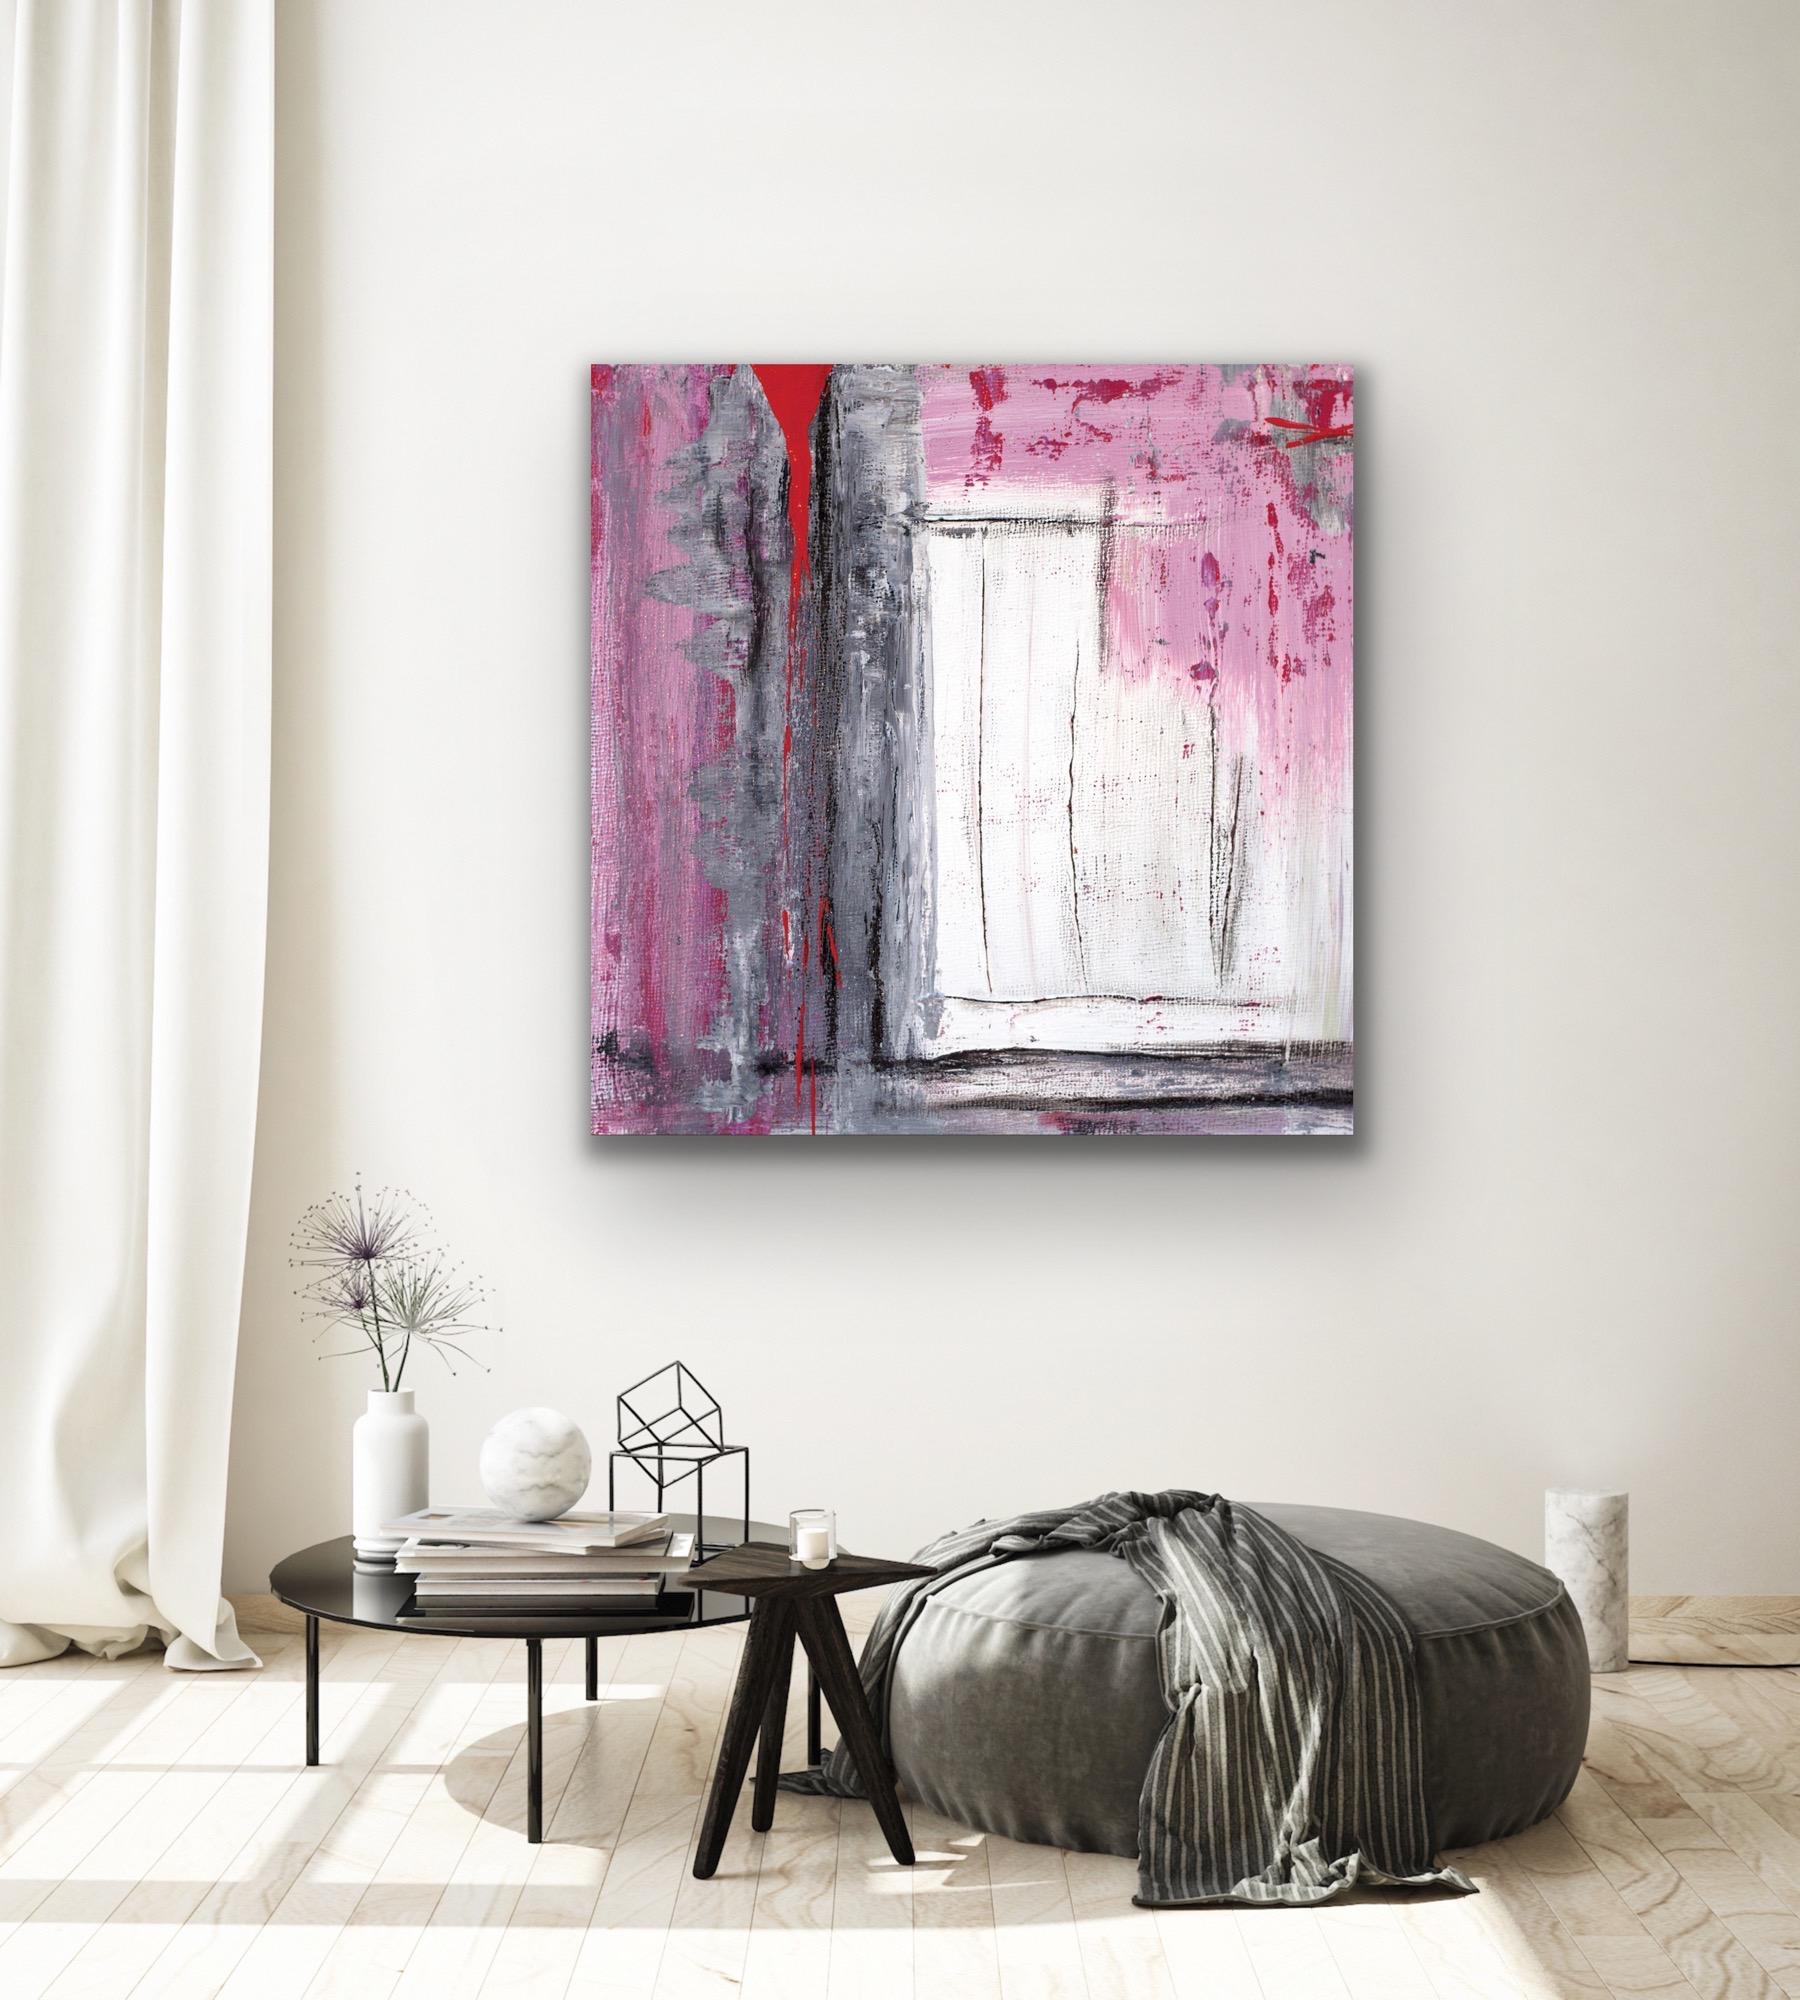 Modern Abstract Wall Art, Black Red Pink, Giclee Print Limited Edition Signed - Gray Abstract Print by Celeste Reiter